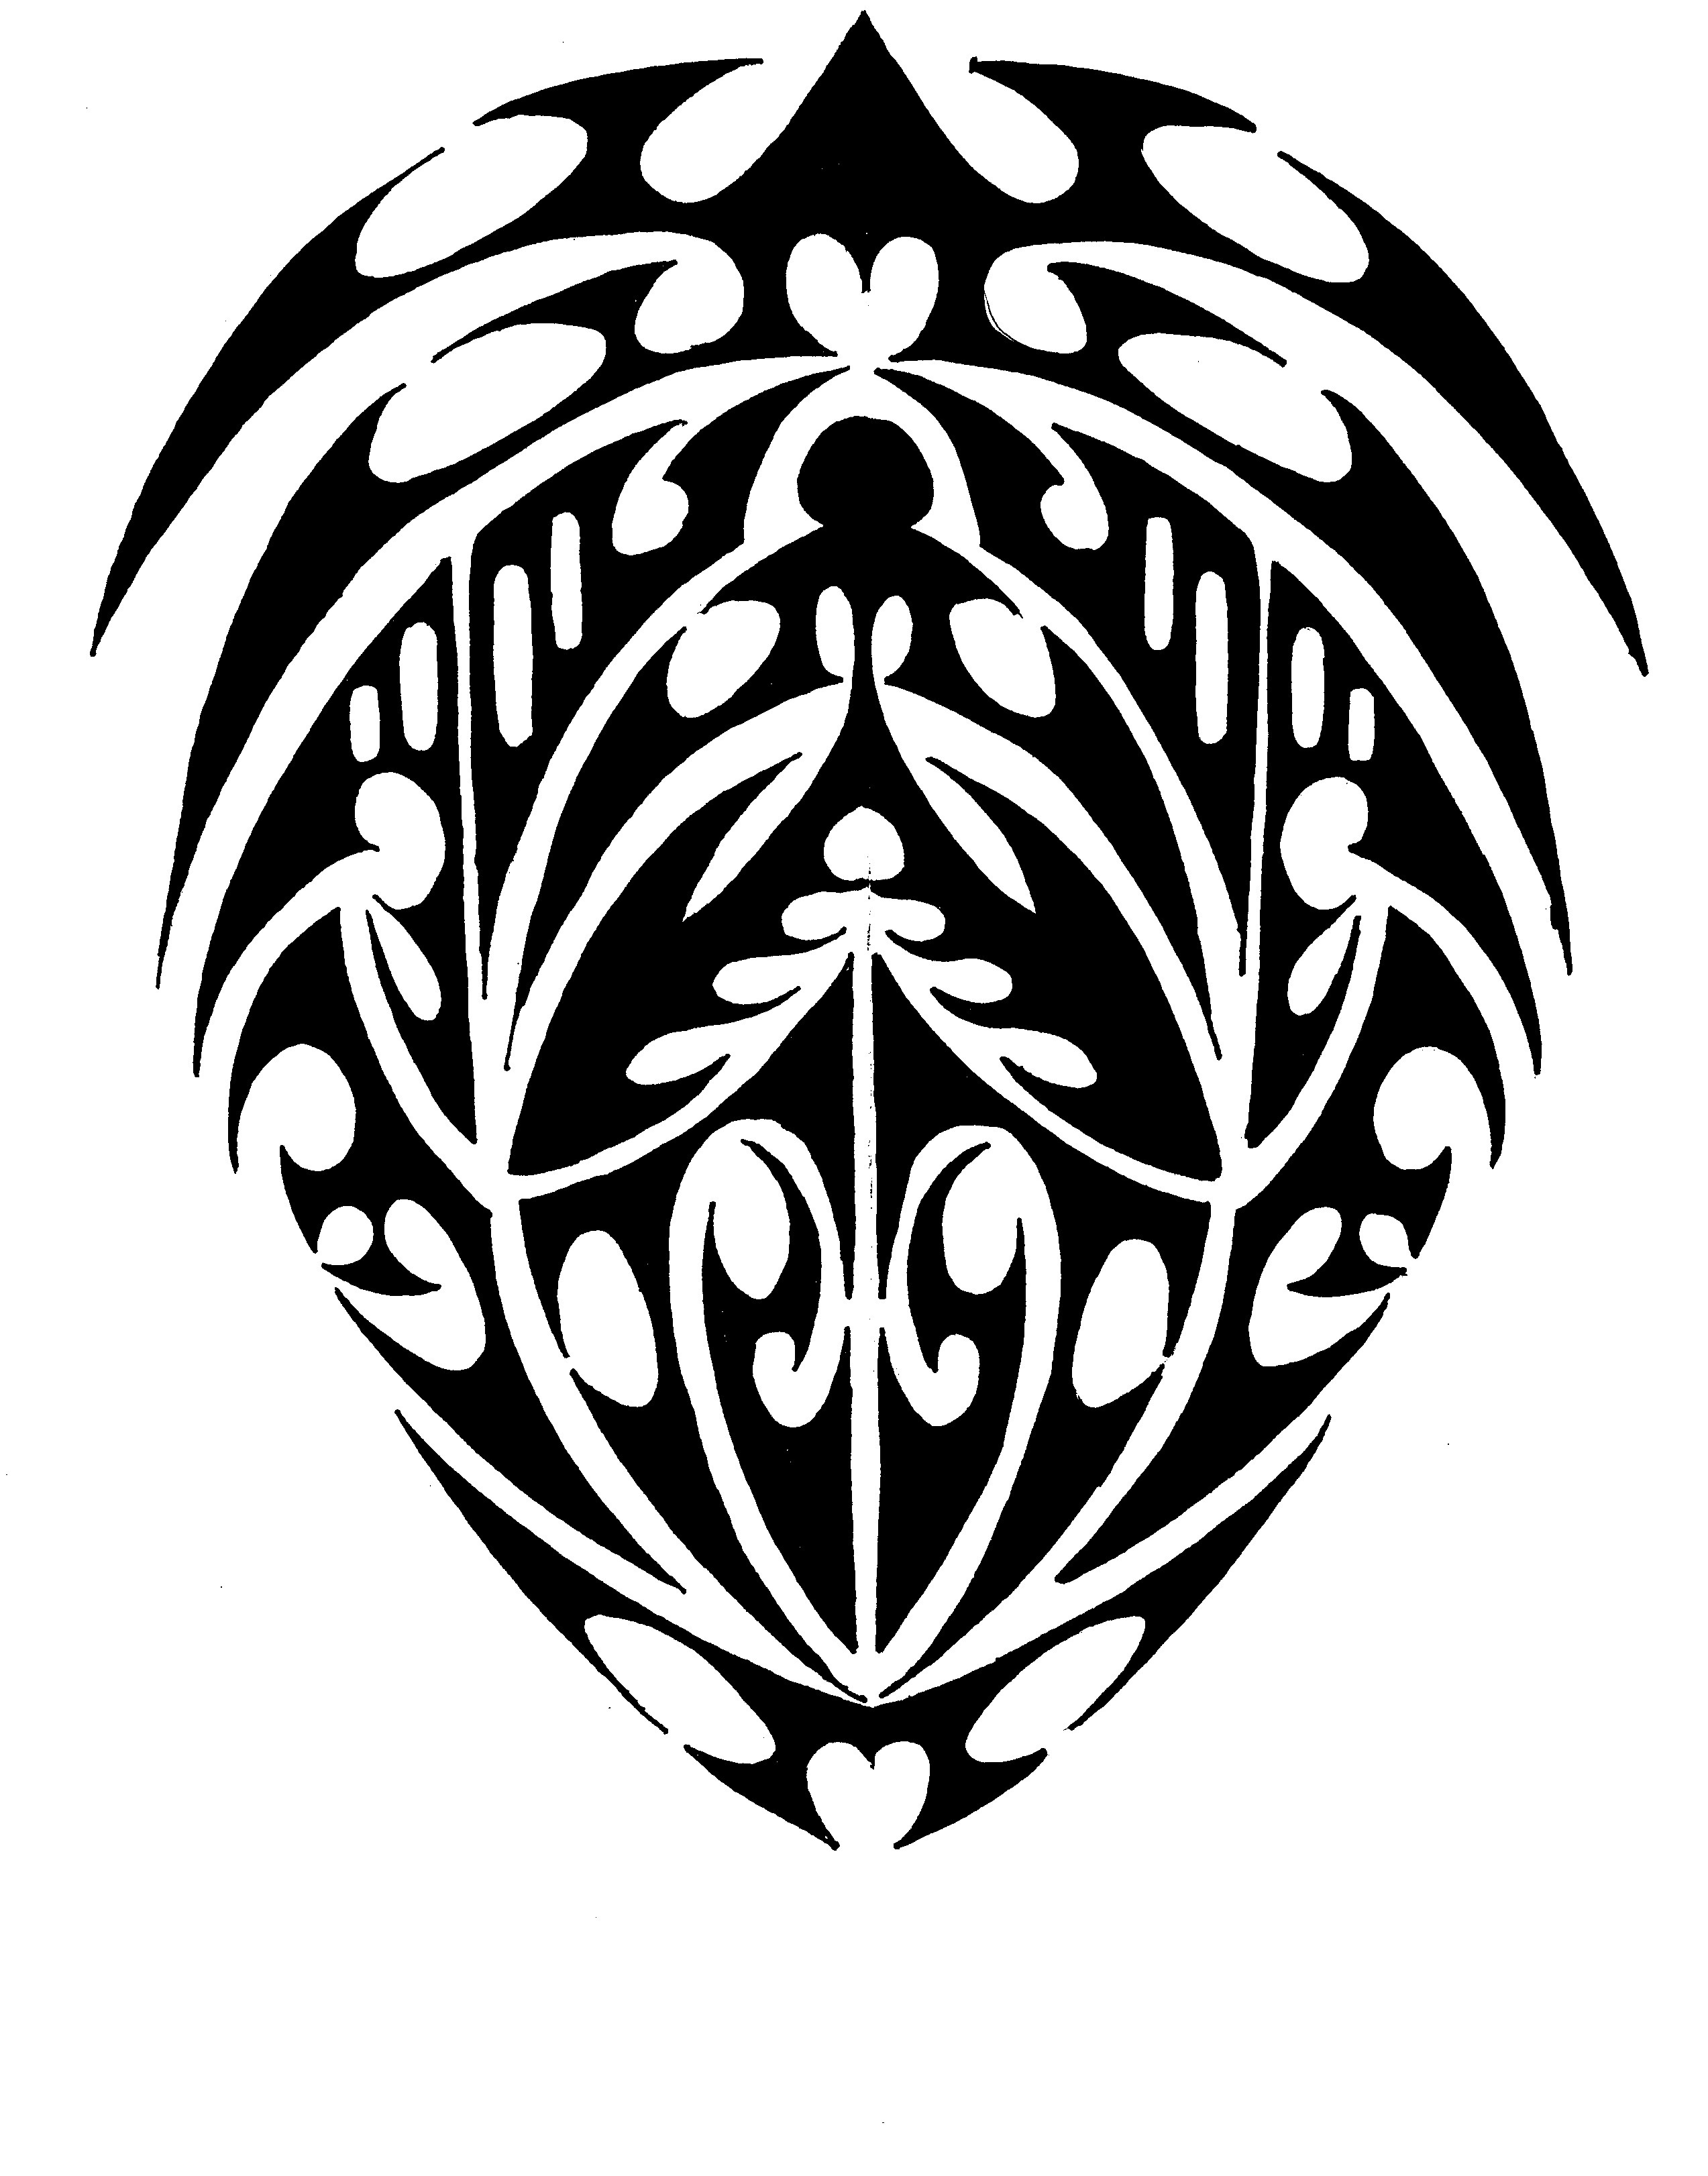 Yet more Tribal Tattoo designs | This Adventure called Life